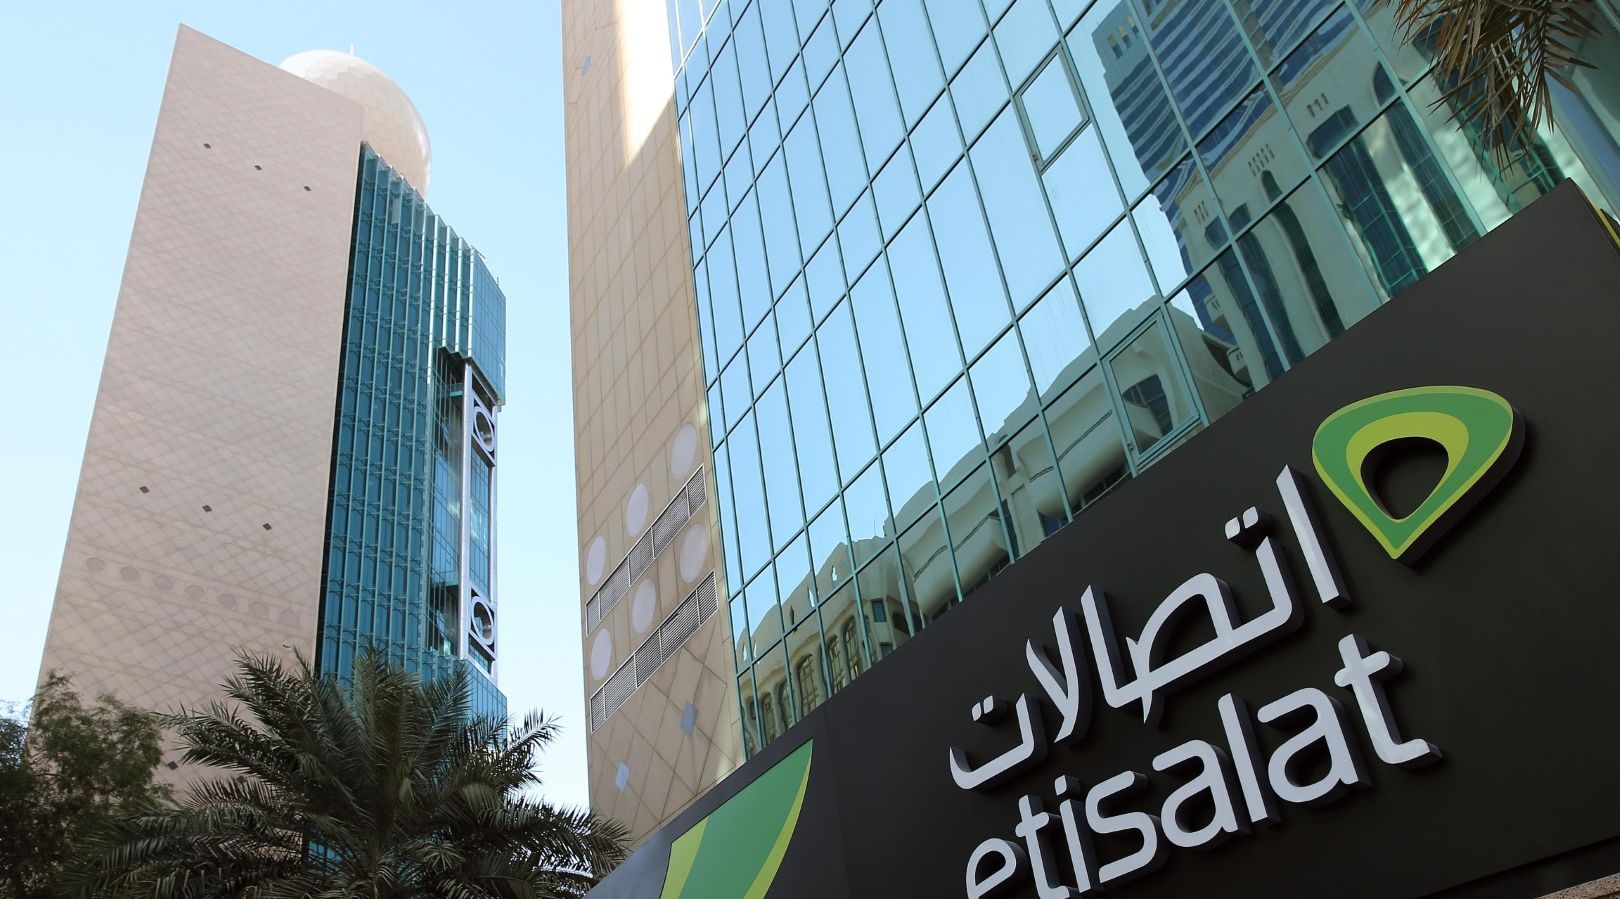 Etisalat participates in global virtual session of WSIS Forum 2020